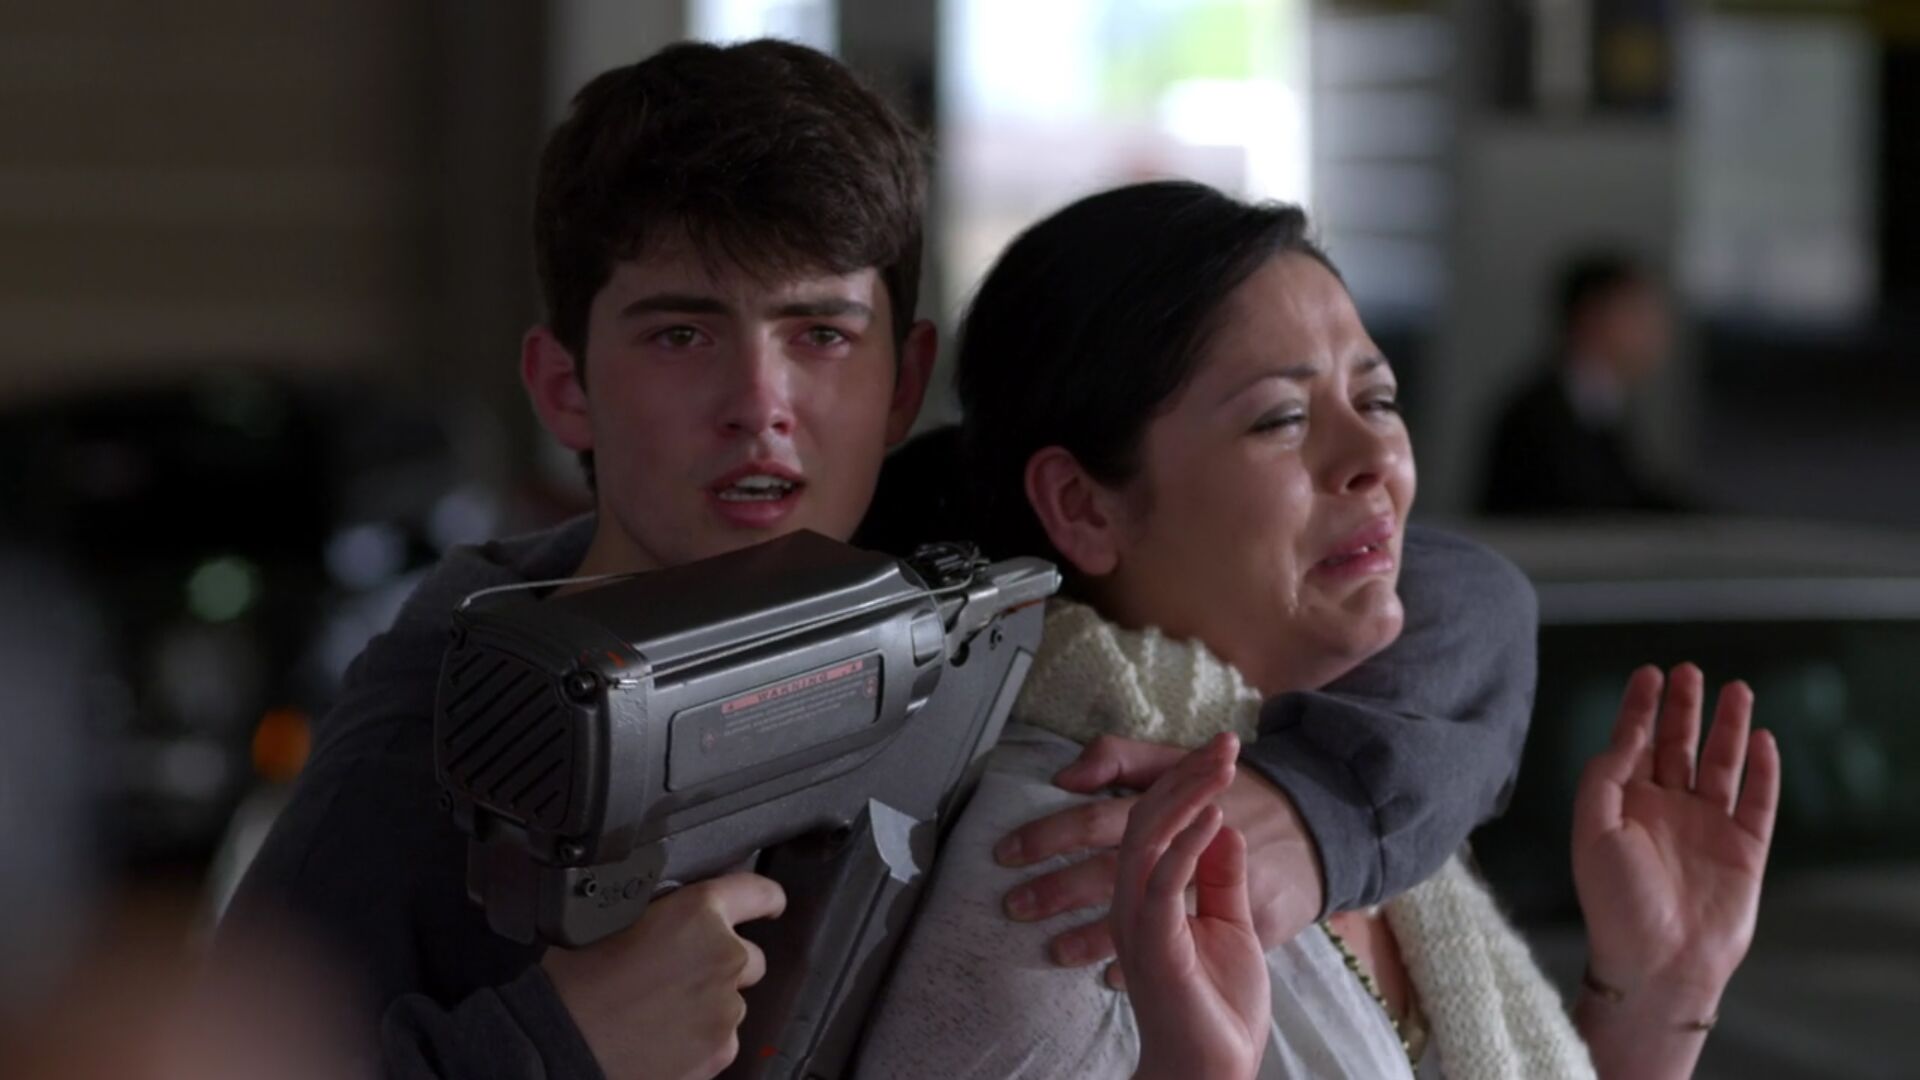 Ian Nelson in Criminal Minds, episode: Hashtag